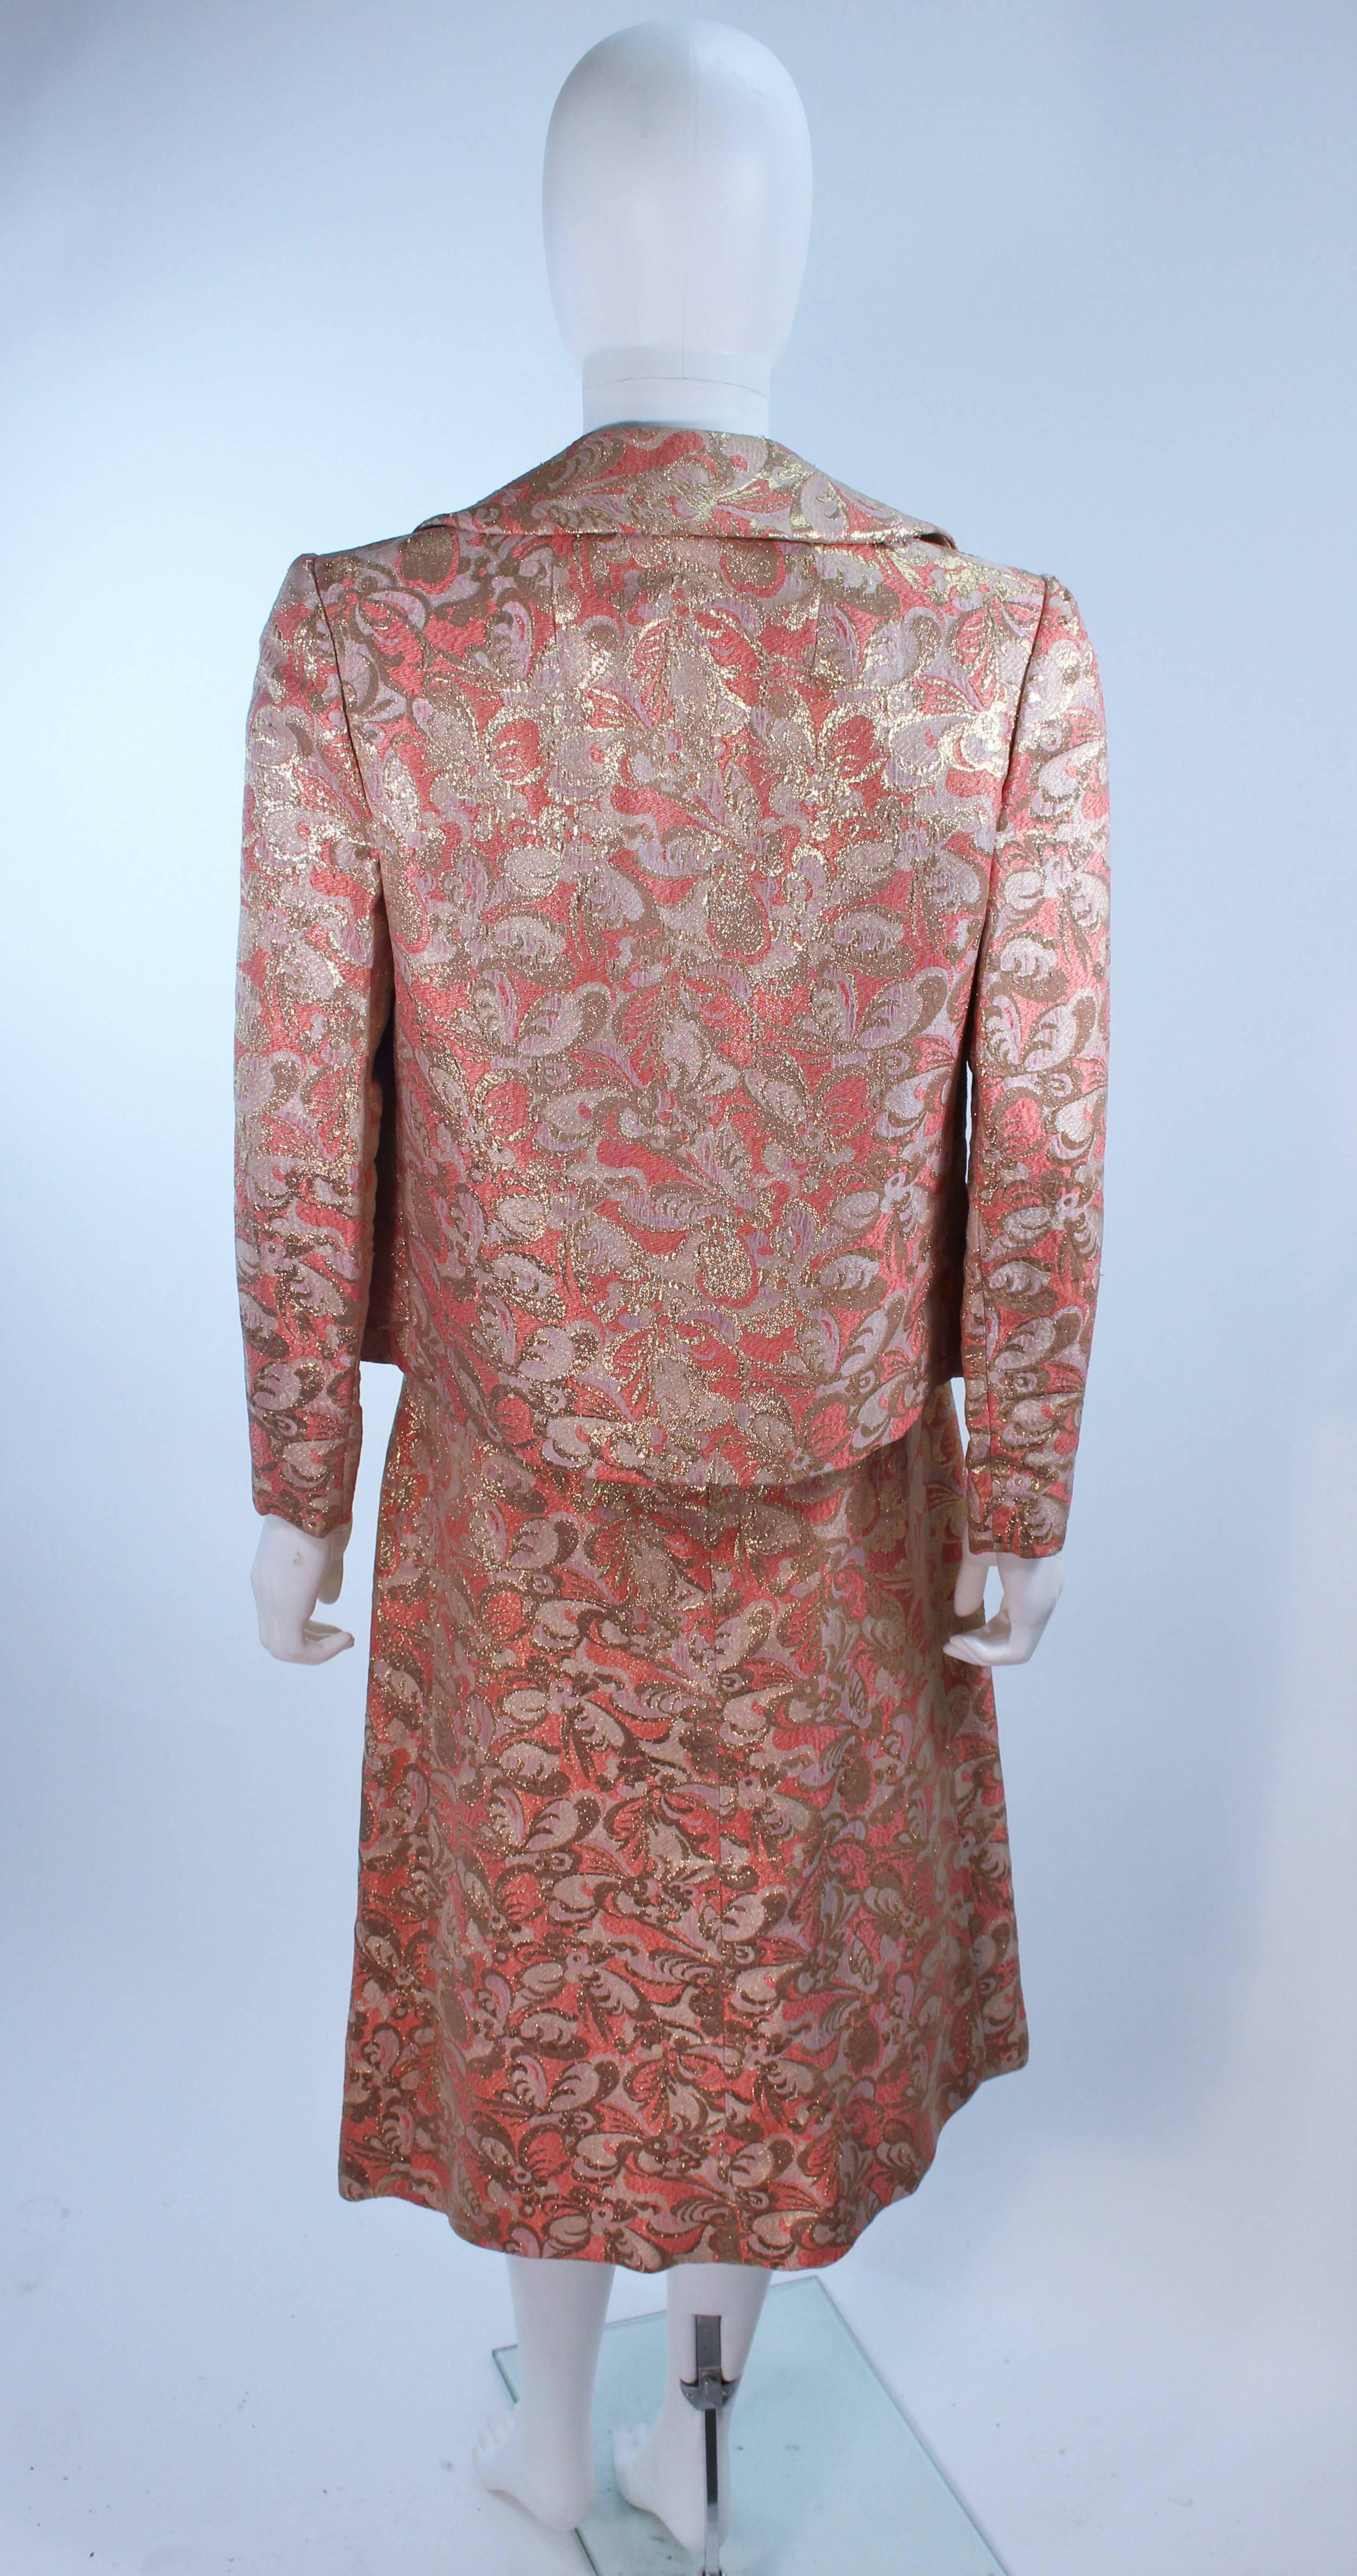 Jimi Fox Peach & Gold Brocade Skirt Suit with Rhinestone Buttons Size 6 For Sale 1